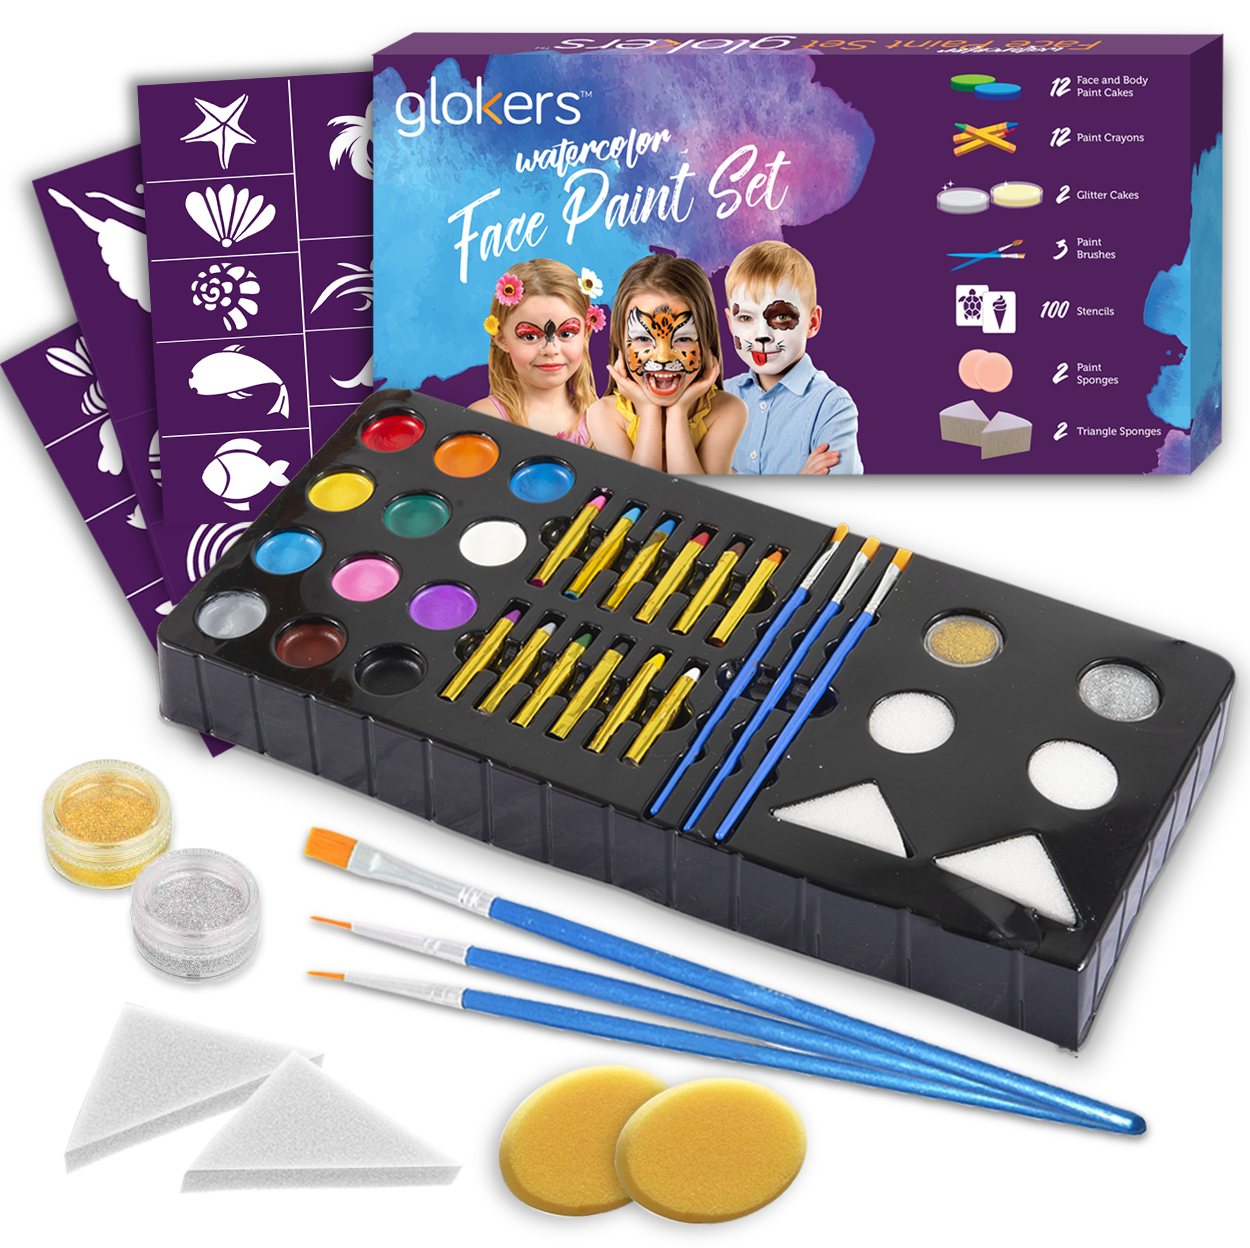 Glokers Face Paint Set - Face painting Kit Contains Cake Paints, Crayons,  Paint Brushes, Glitter, Sponges and Stencils - Sensitive Skin Face and Body  Paint - Suitable for Adults and Children, FDA